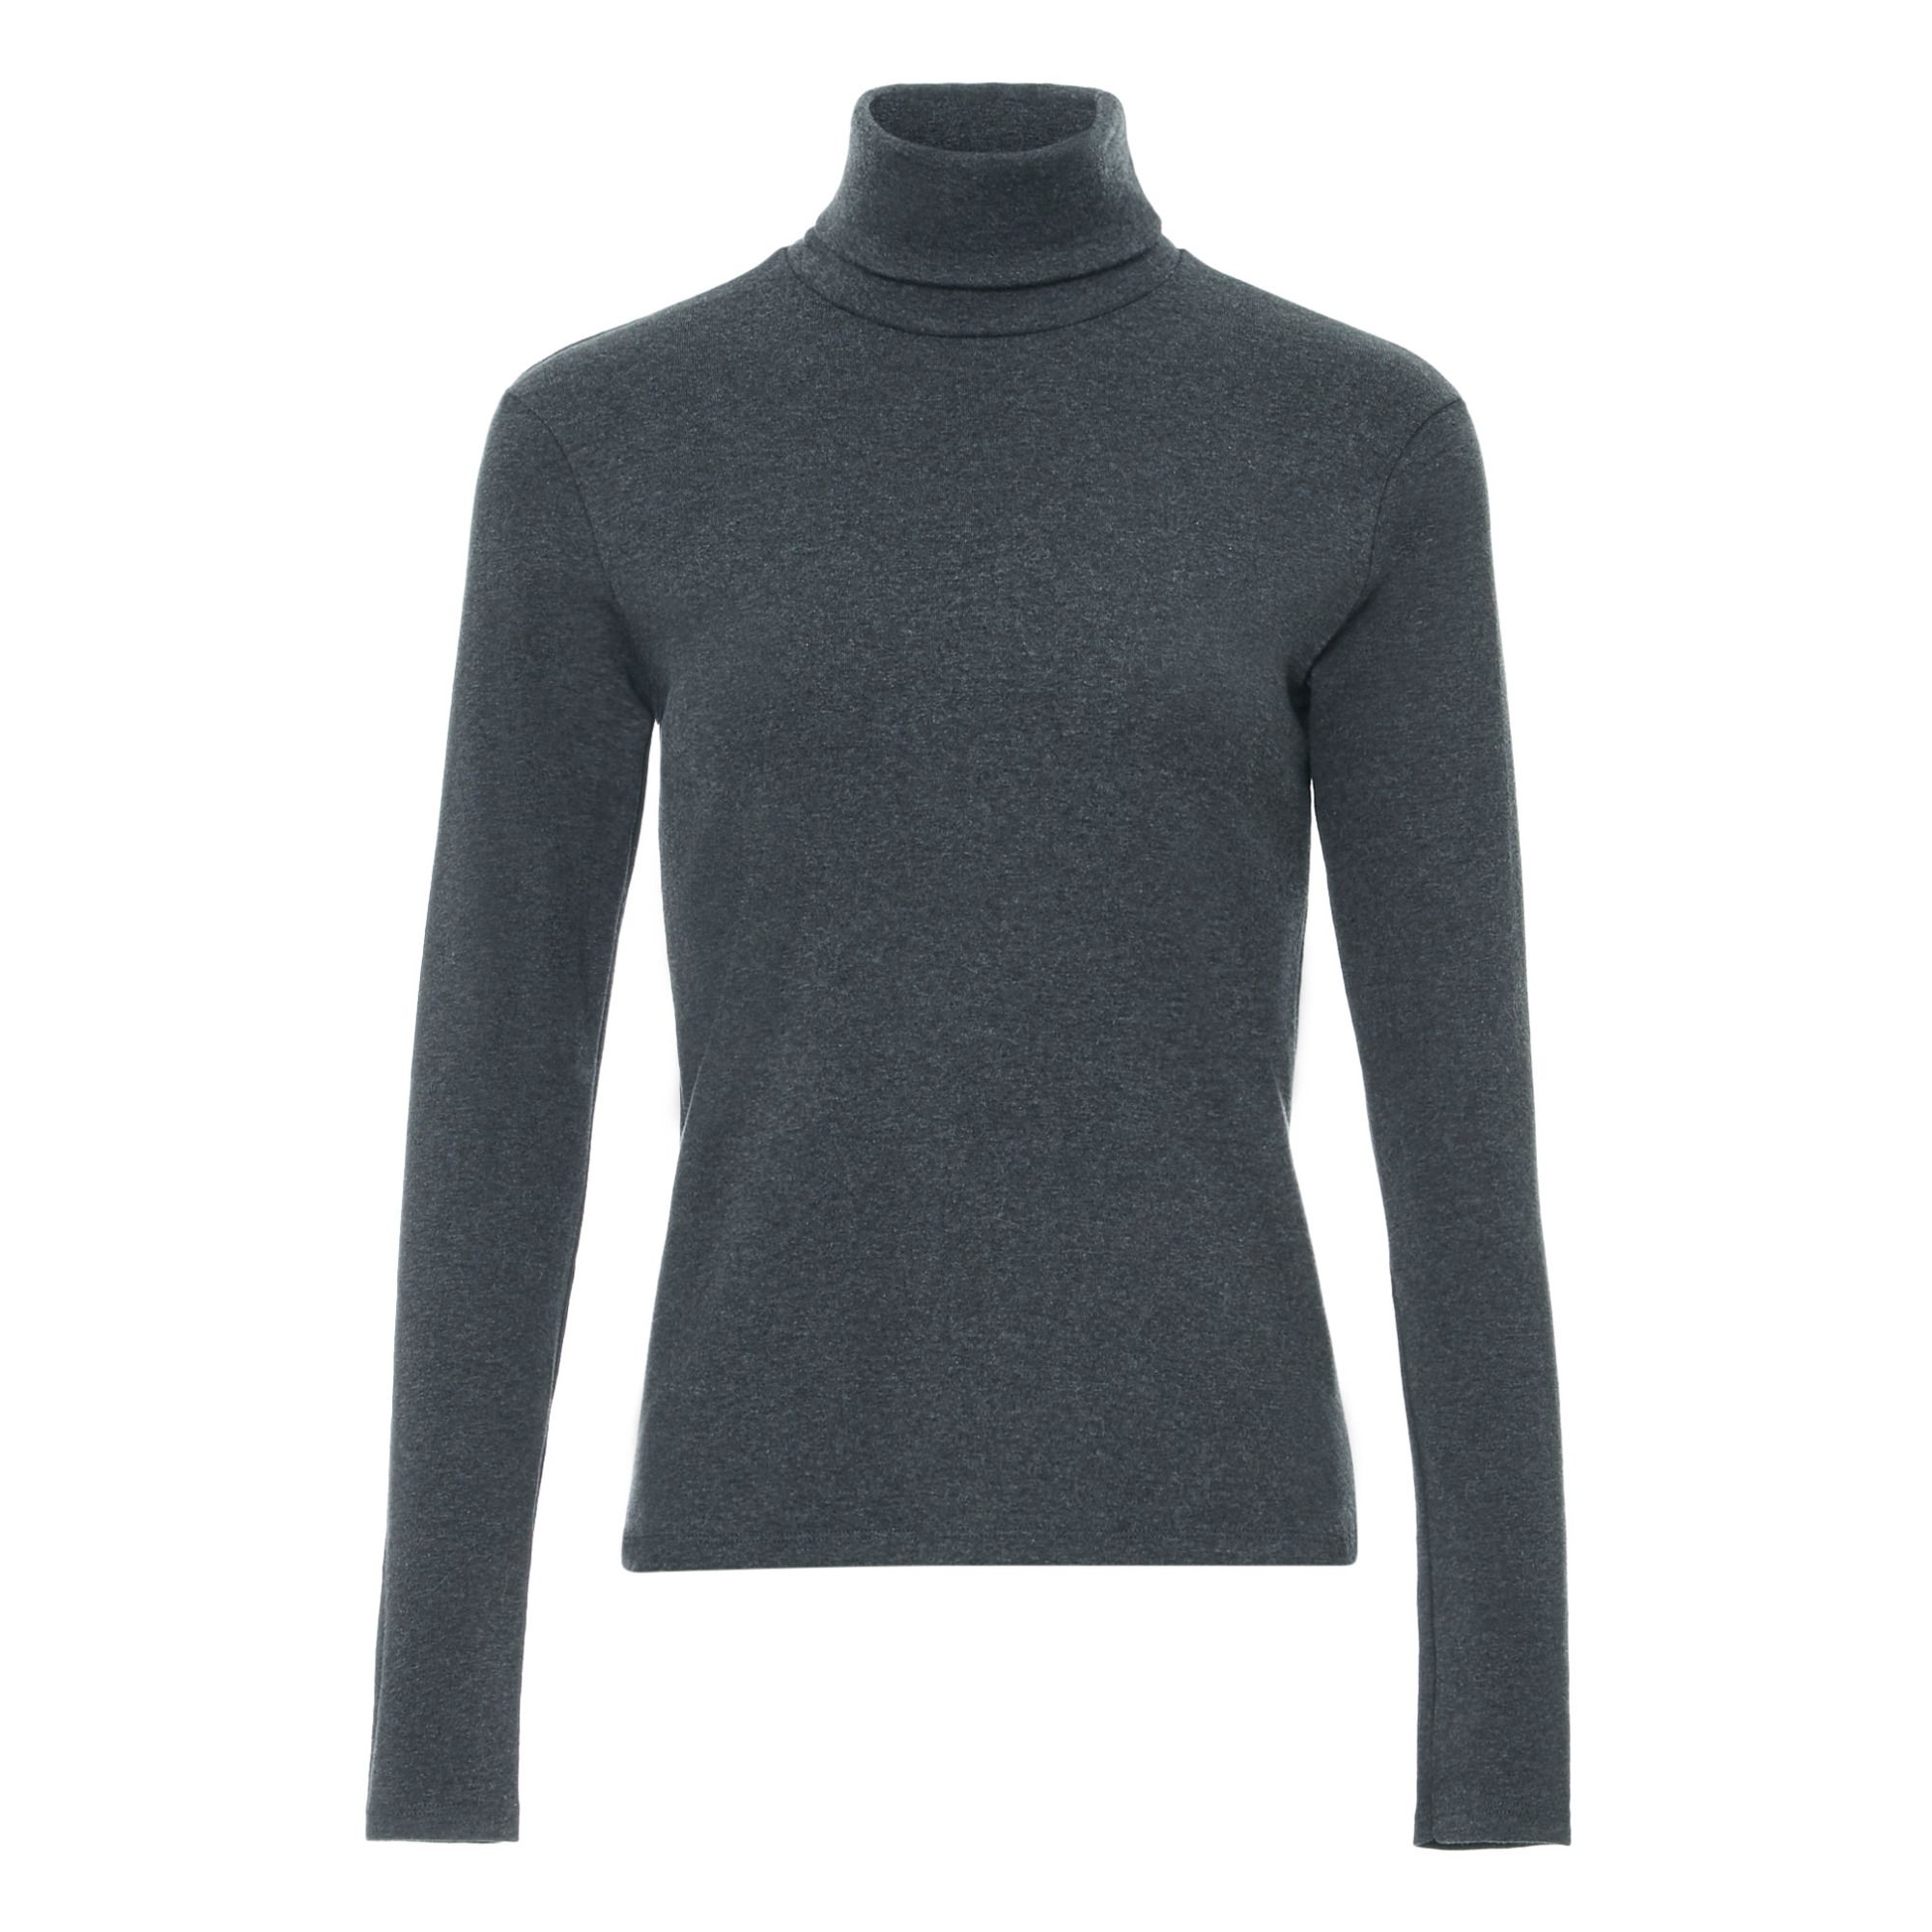 Iconic Polo-neck Jumper - Adult Collection Heather grey Petit